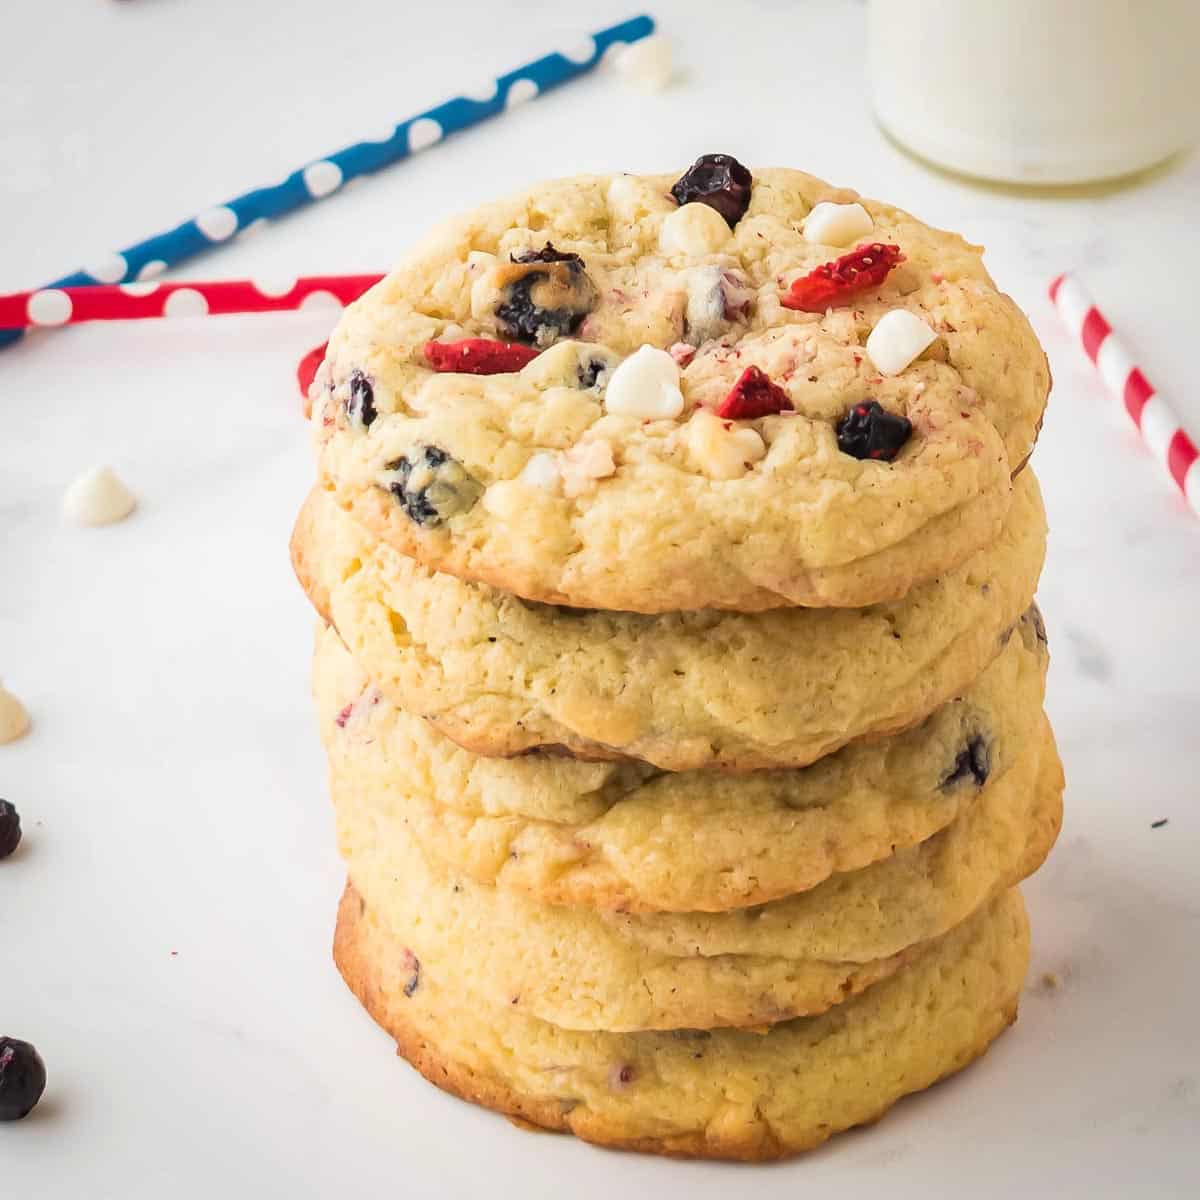 Side angled shot of multiple cookies stacked on each other on a white surface with red white and blue straws in the background.